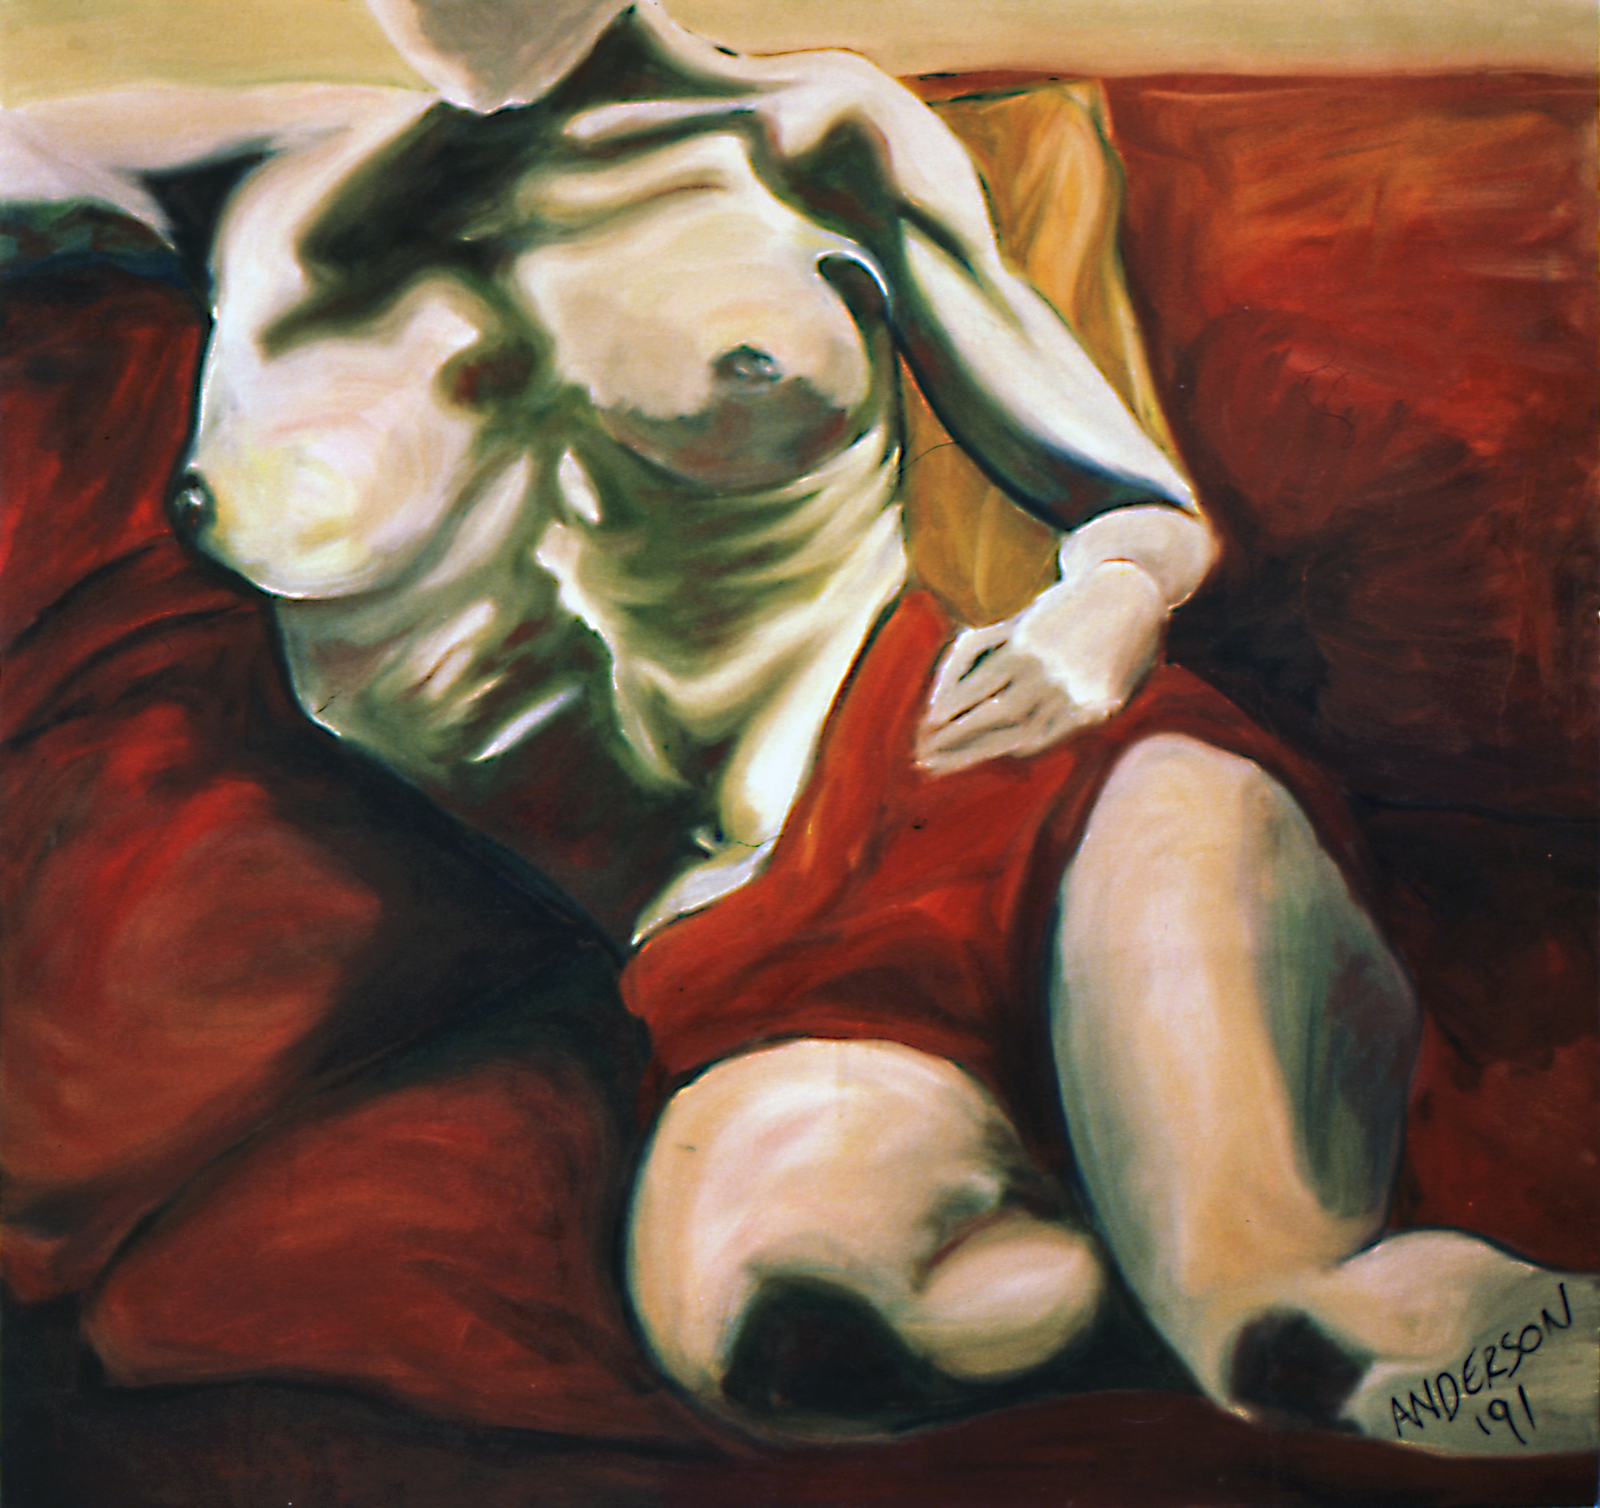 “Large Female Nude” by Stephen P. Anderson